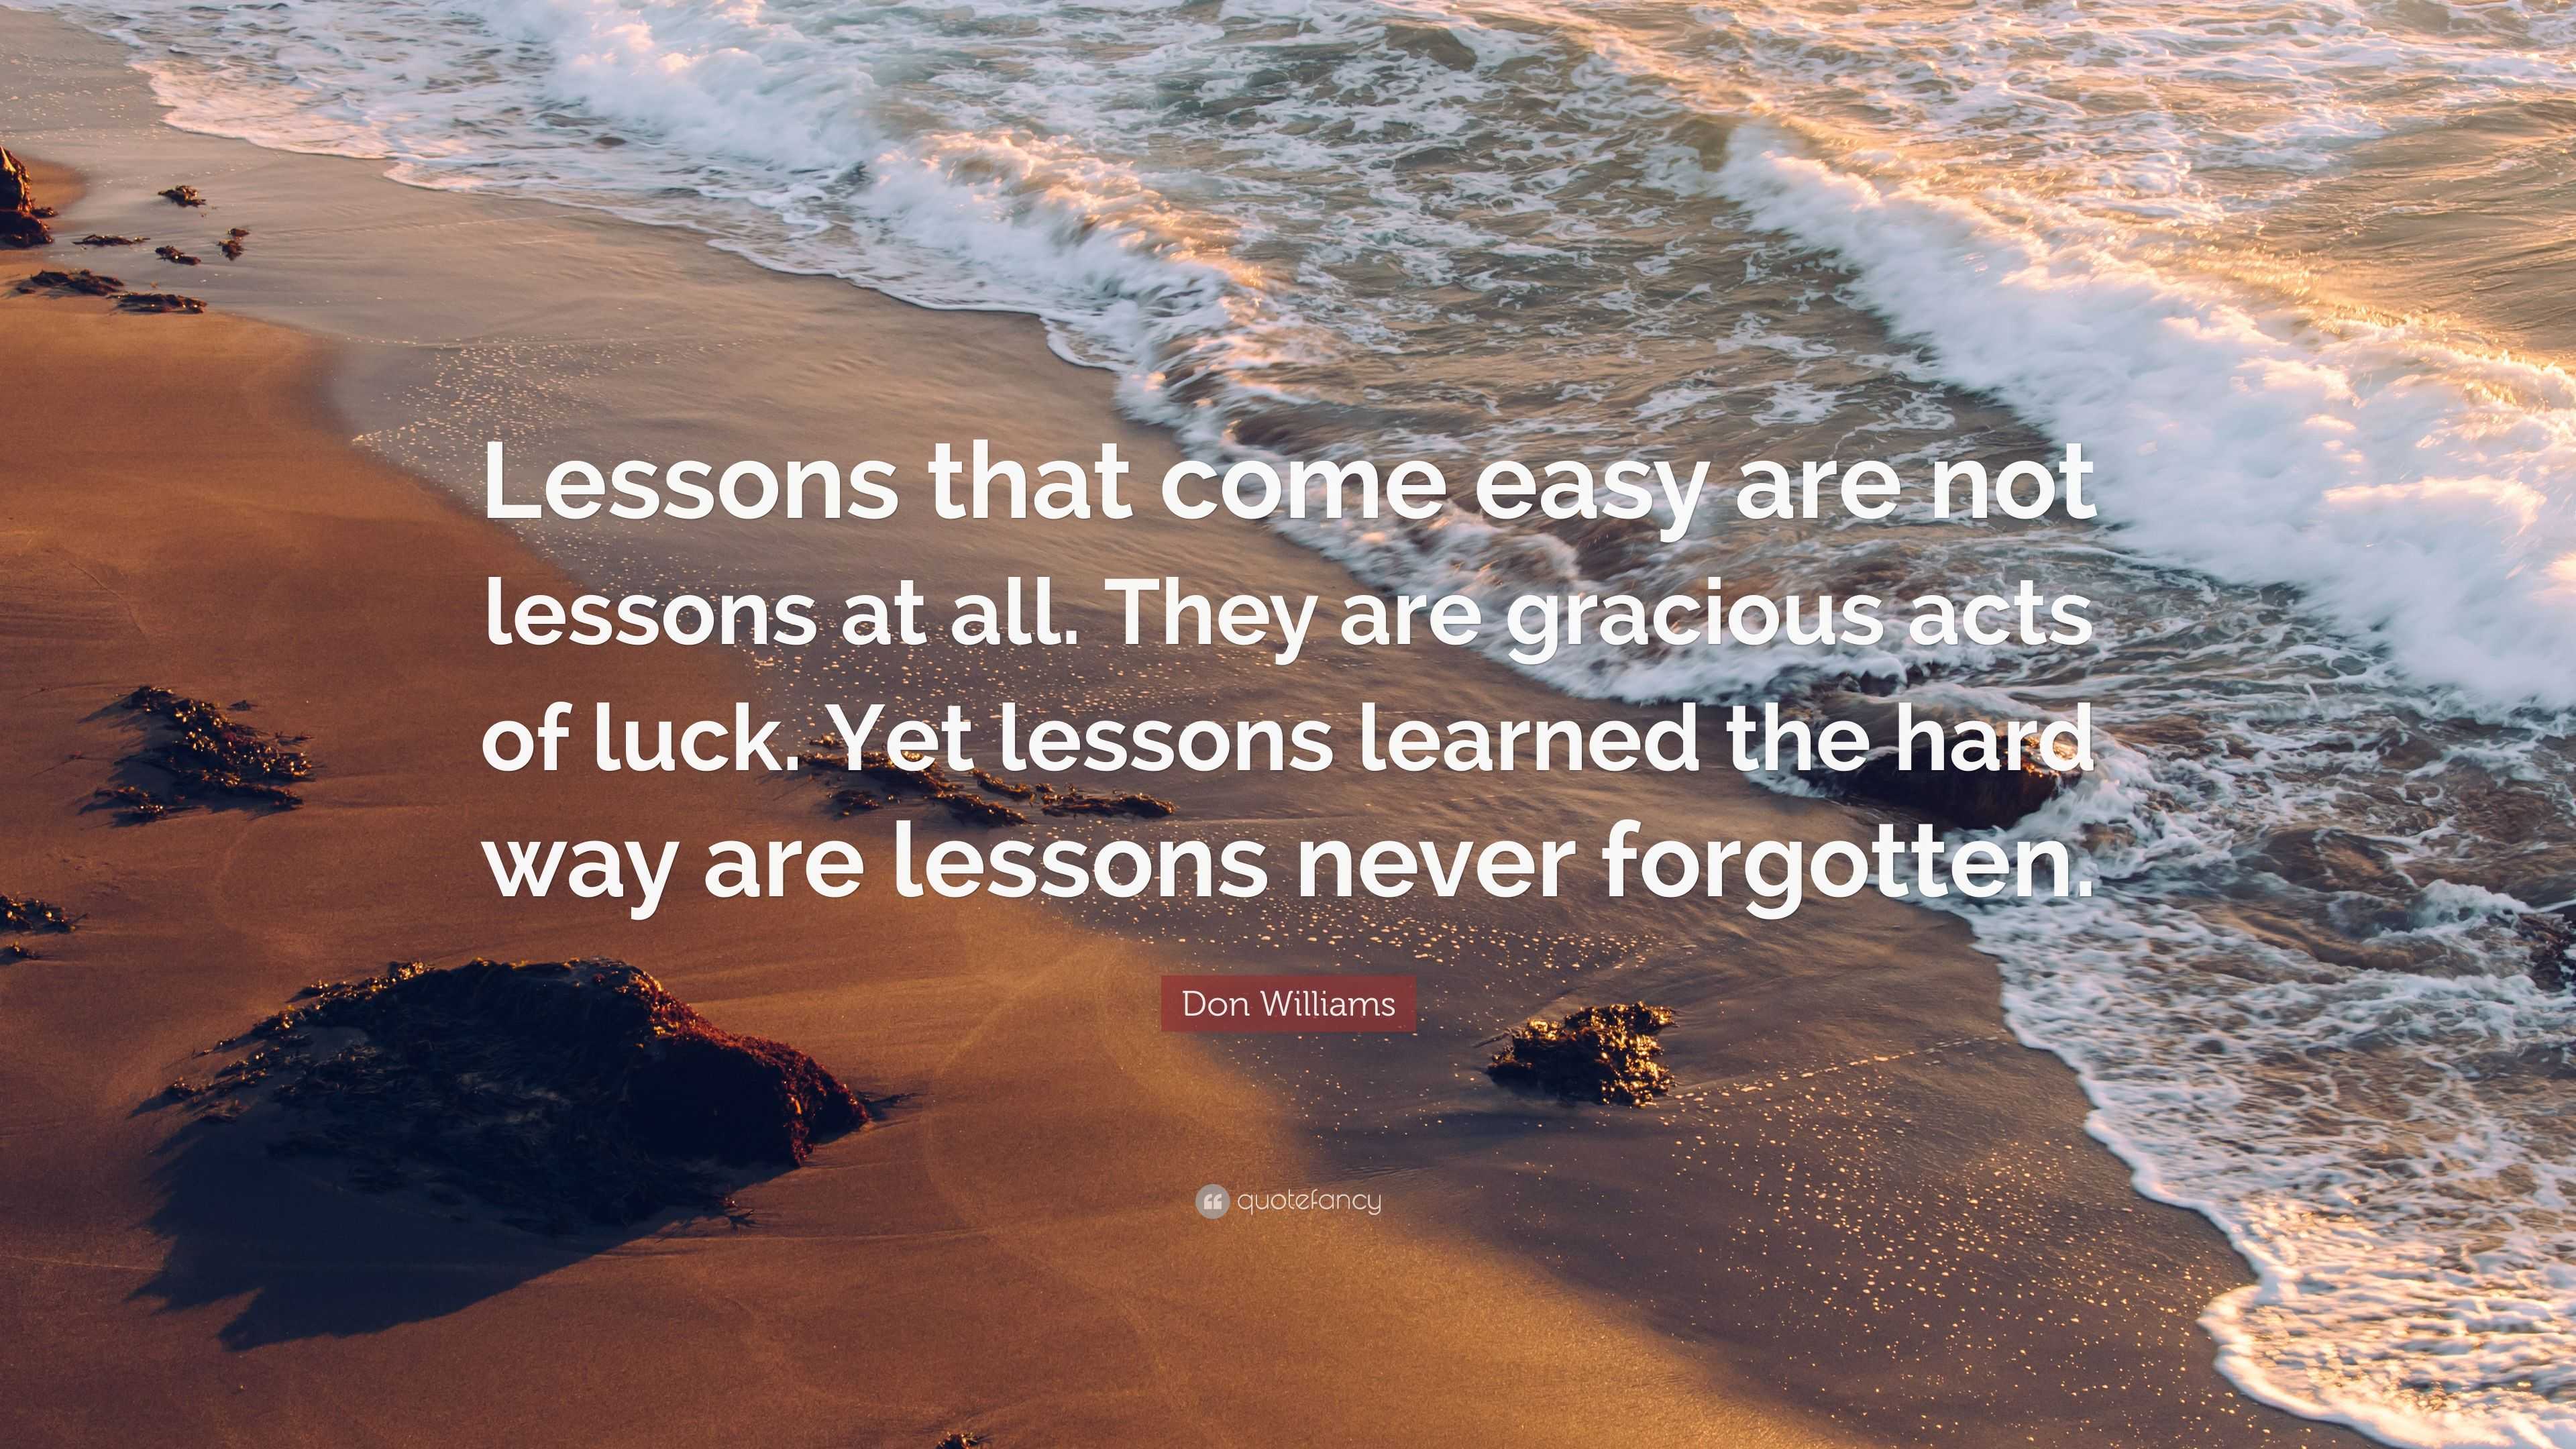 Don Williams Quote: “Lessons that come easy are not lessons at all. They  are gracious acts of luck. Yet lessons learned the hard way are less”